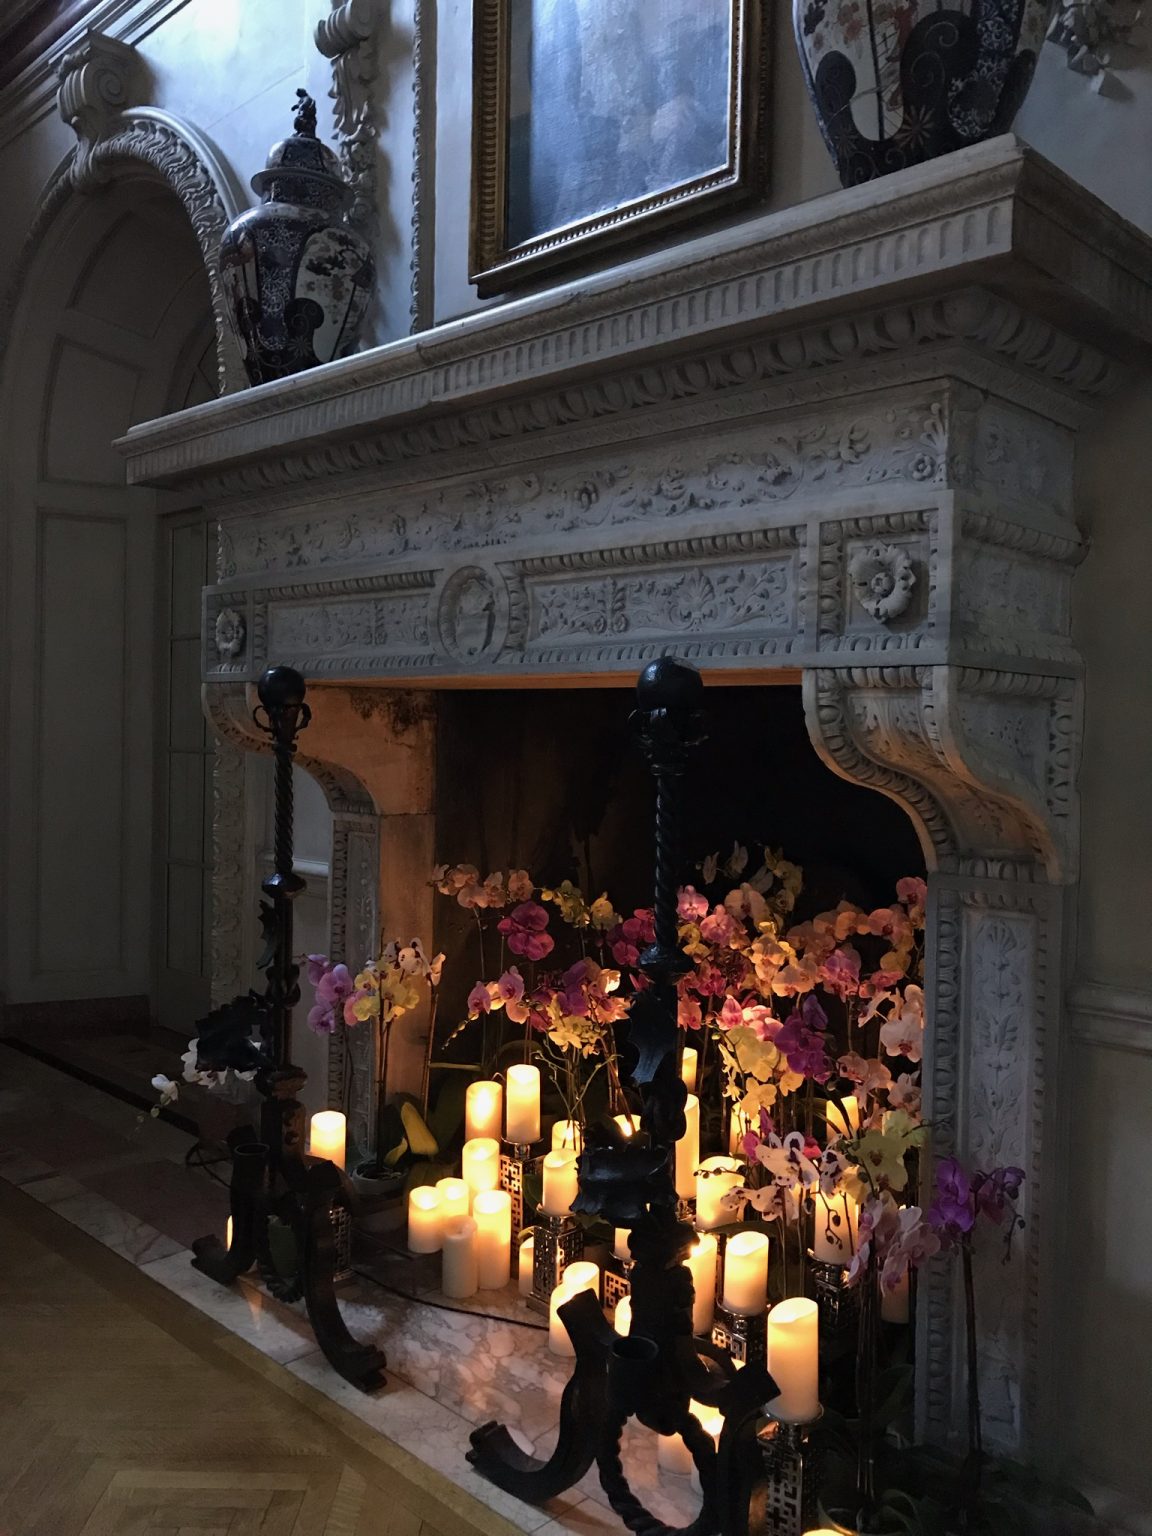 h2>Fireplace brought to life</h2>